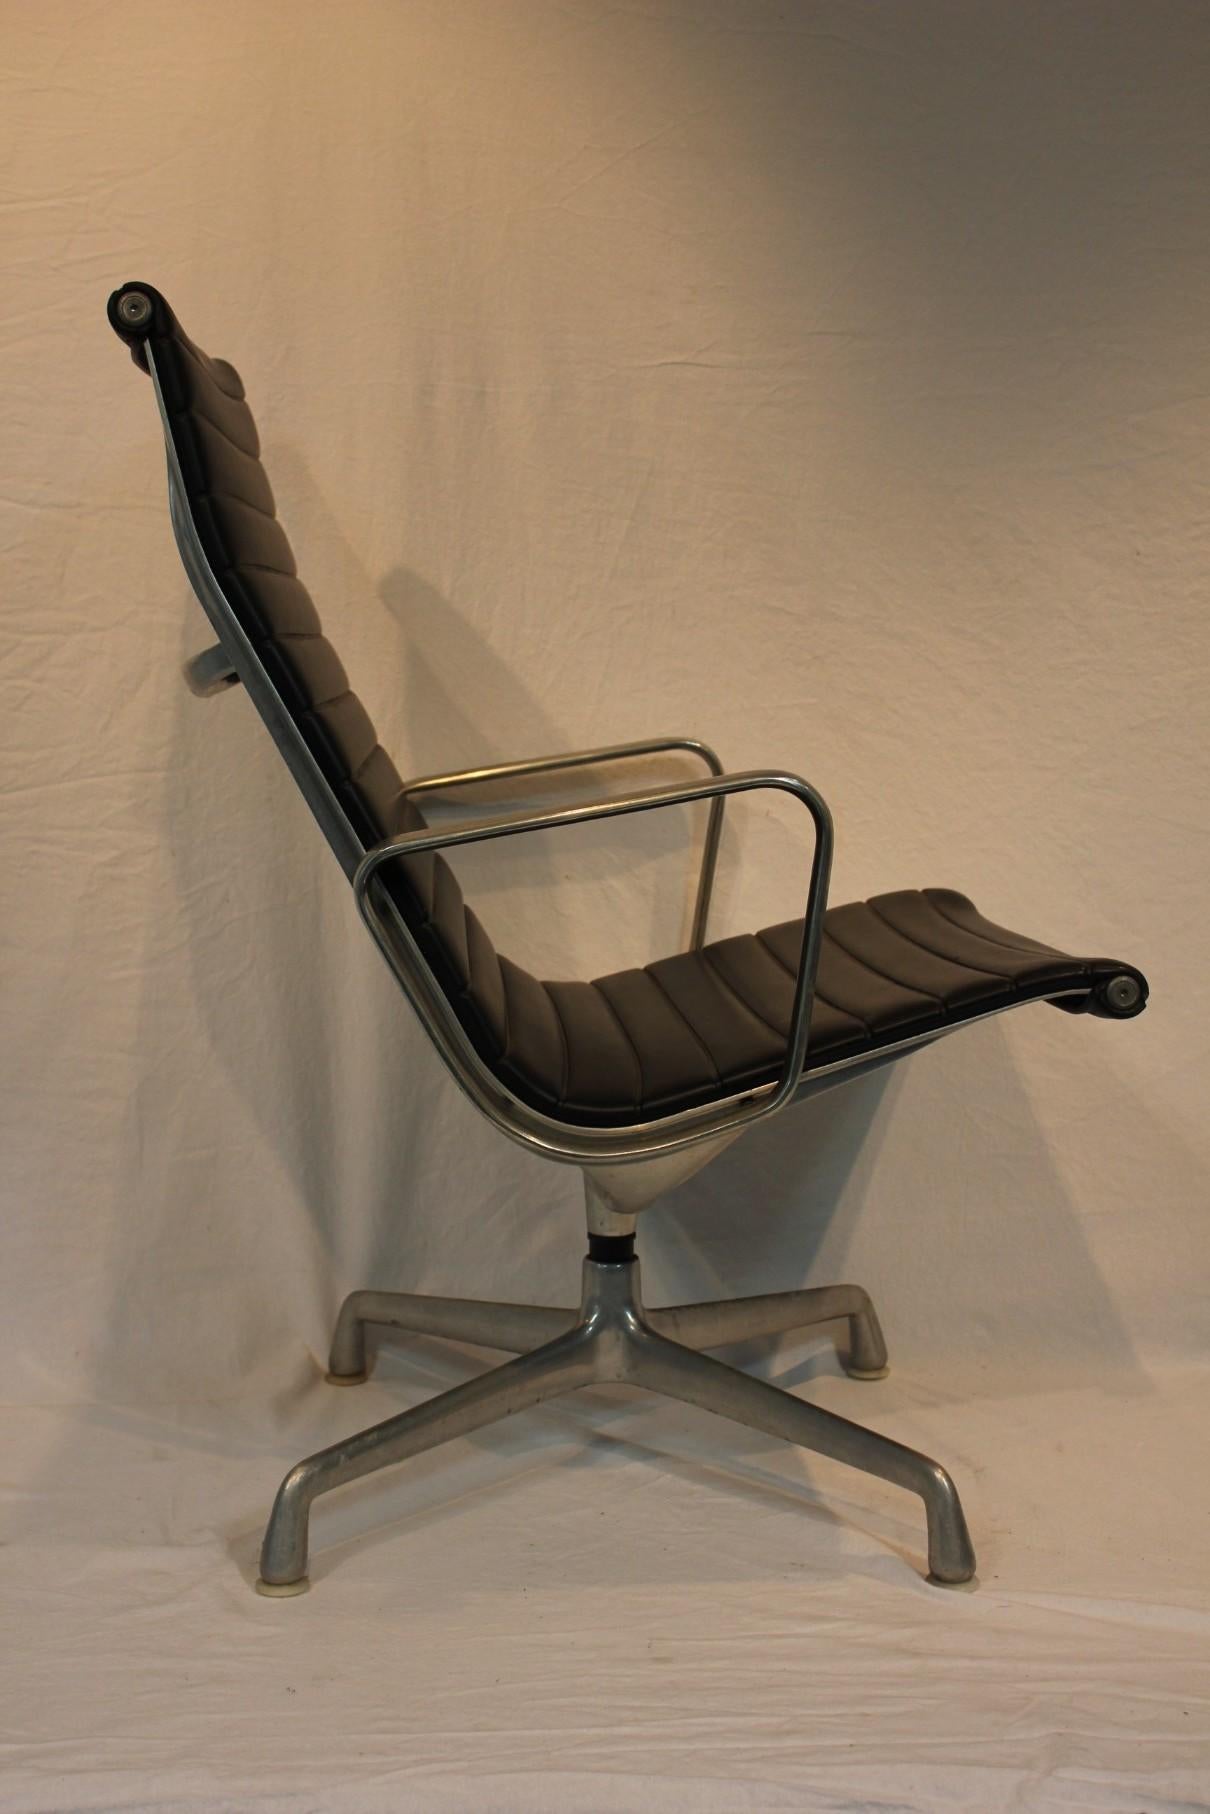 Herman Miller Eames Aluminum Lounge Chair Mid 20th Century Modern Circa 1970 For Sale 1